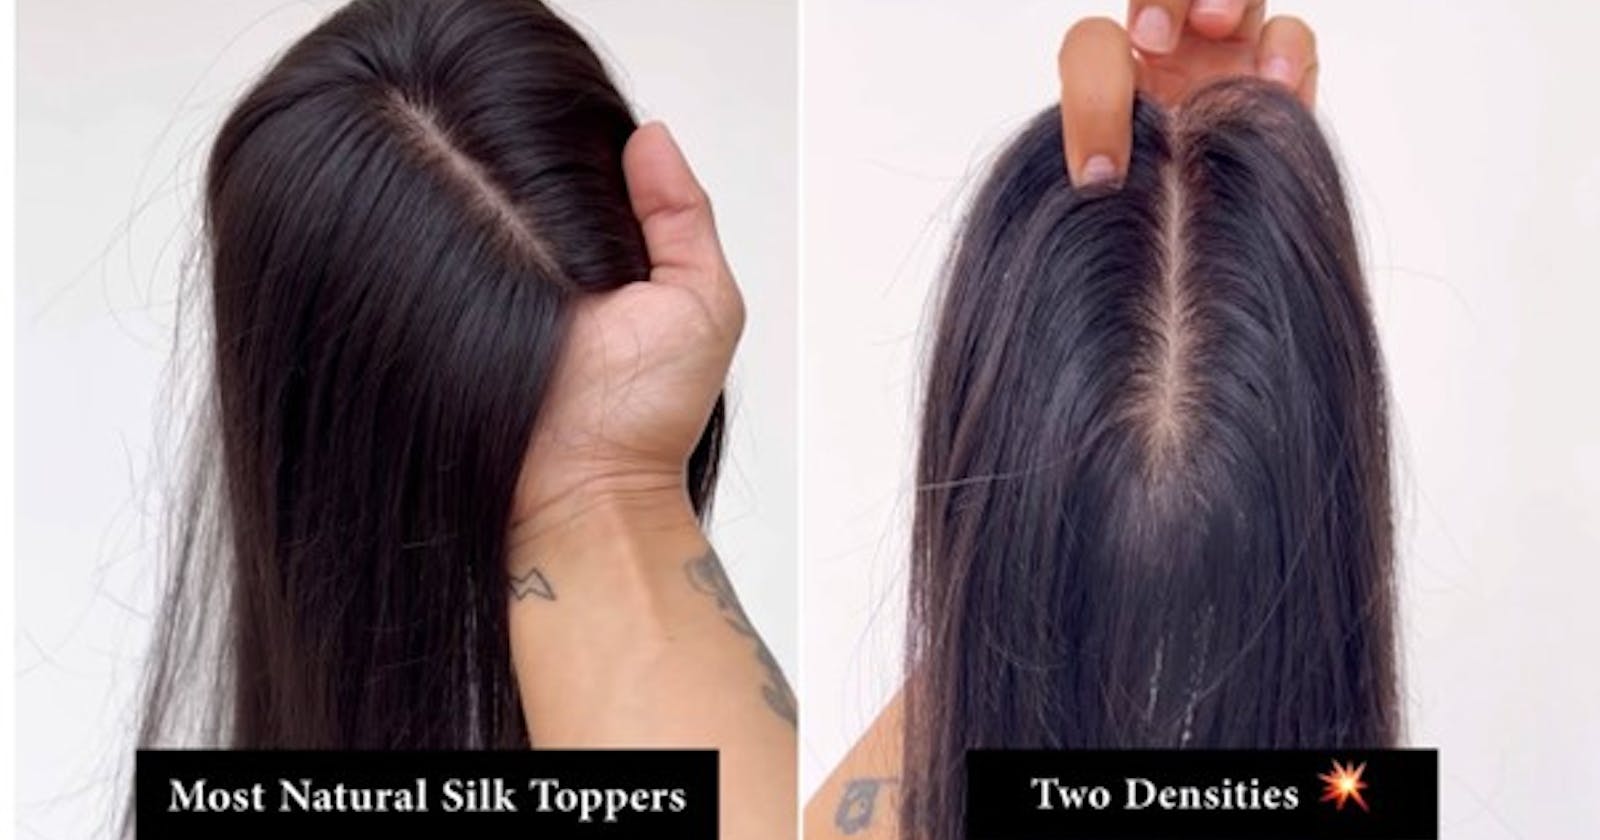 Human Hair Toppers For Women: How To Choose The Right One